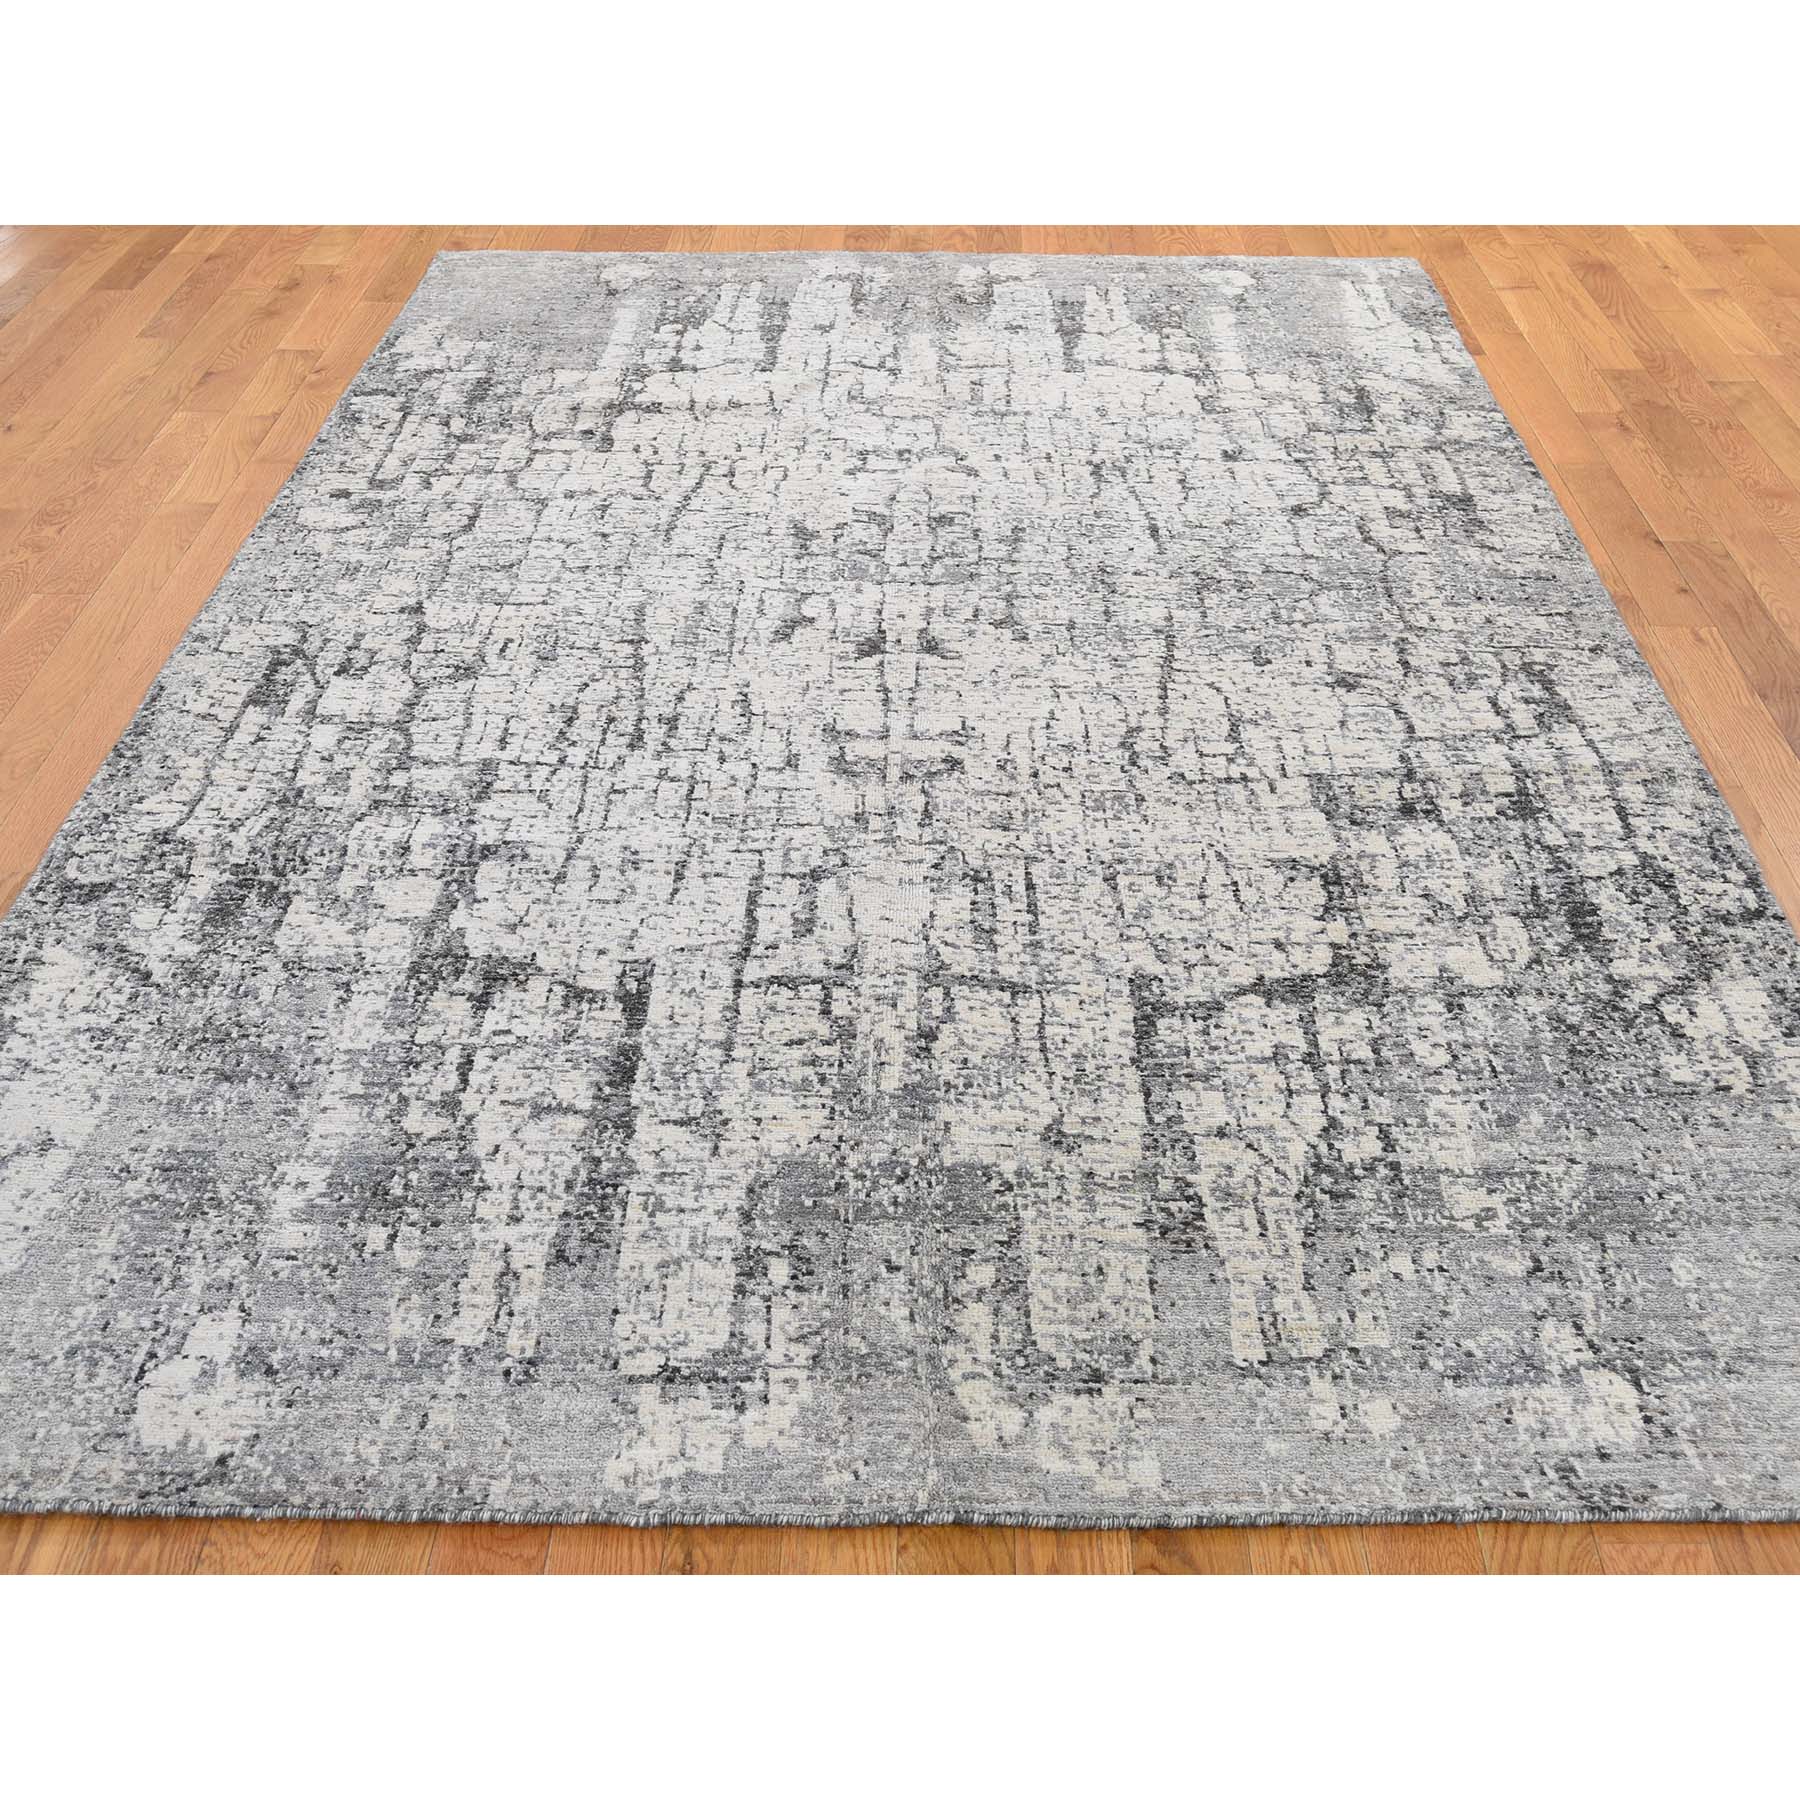 6-x9- Abstract Hand-Knotted Hi-Lo Pile THE TREE BARK Soft Wool Oriental Rug 